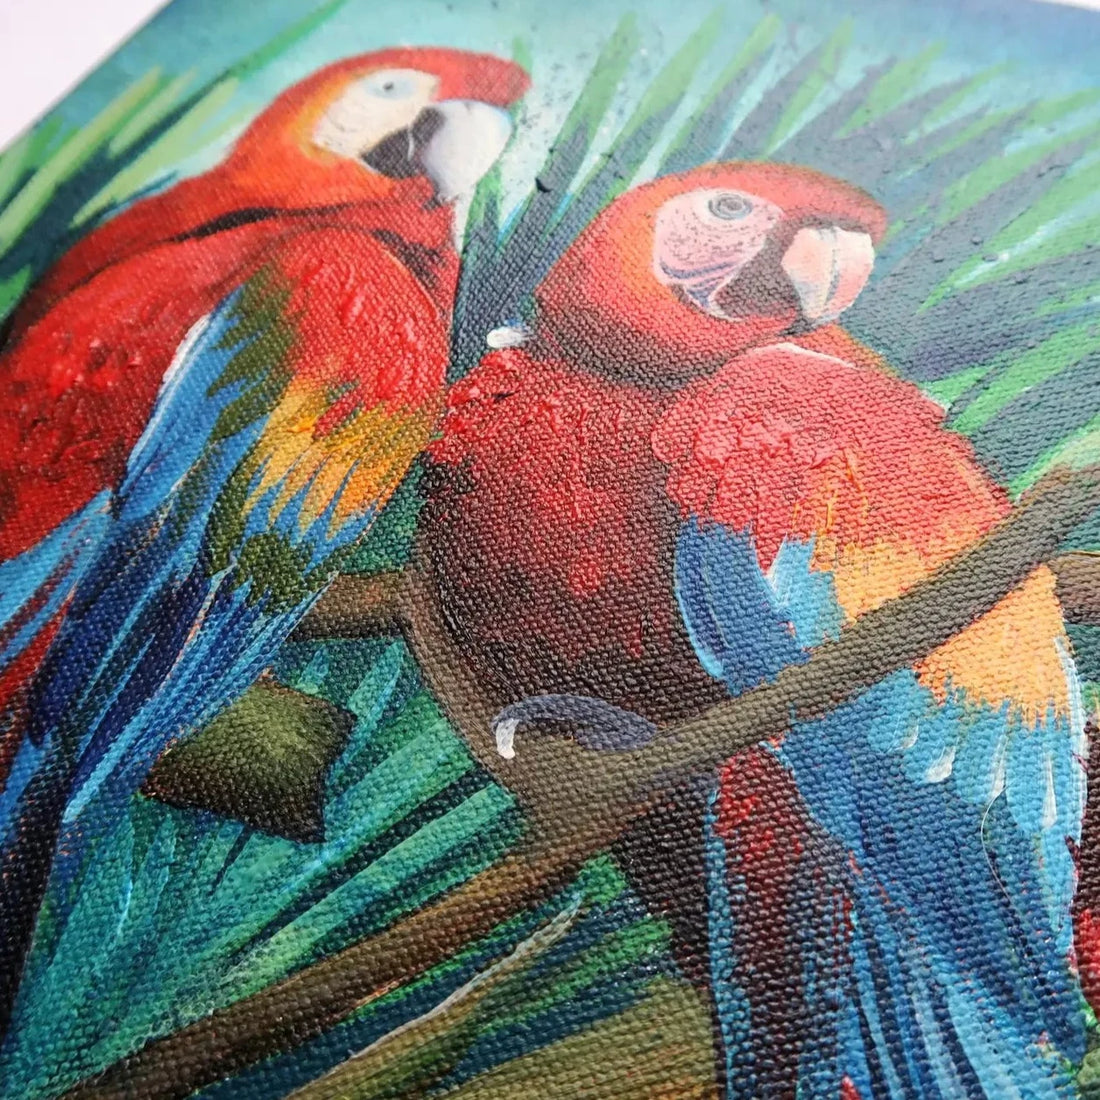 Acrylic Painting Workshop: Create Stunning 2 Macaws in a Tropical Forest on Wrapped Canvas